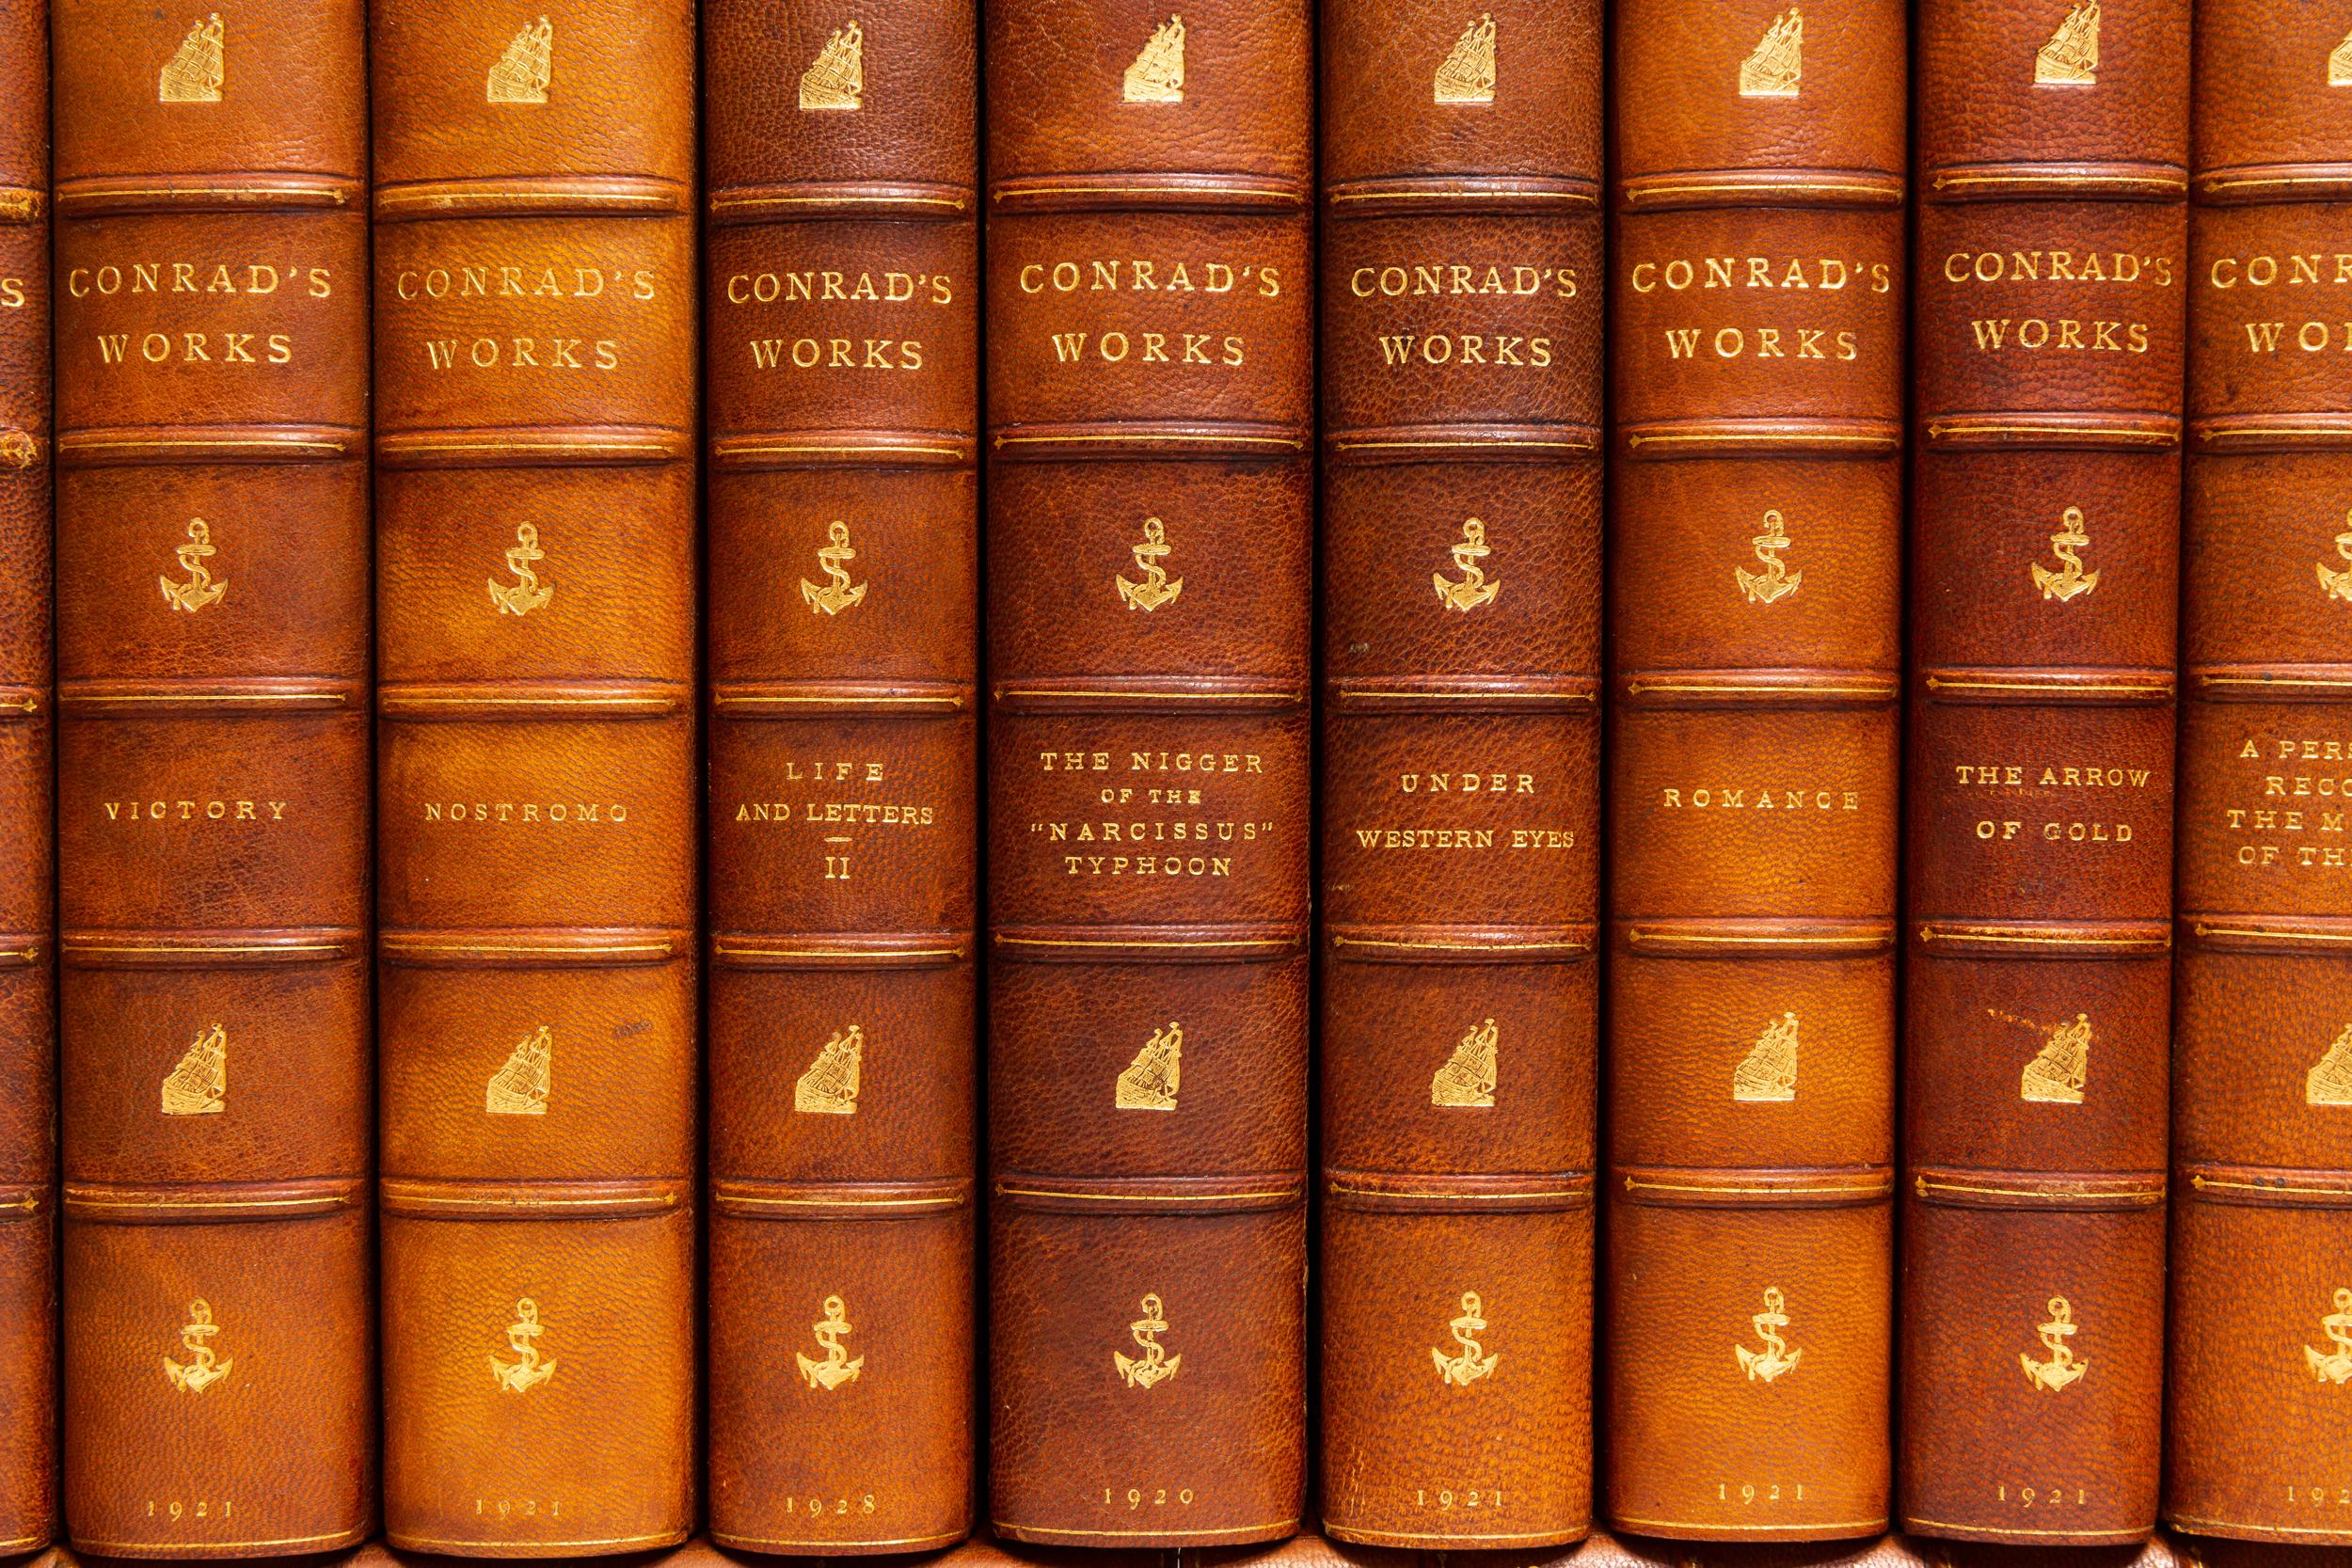 24 Volumes. Joseph Conrad, The Works of Joseph Conrad. Bound in 3/4 brown morocco. Linen boards. Raised bands. Top edges gilt. Decorative gilt emblems on spines. Marbled endpapers. This Sun-Dial Edition is limited to 735 copies. The first volume of